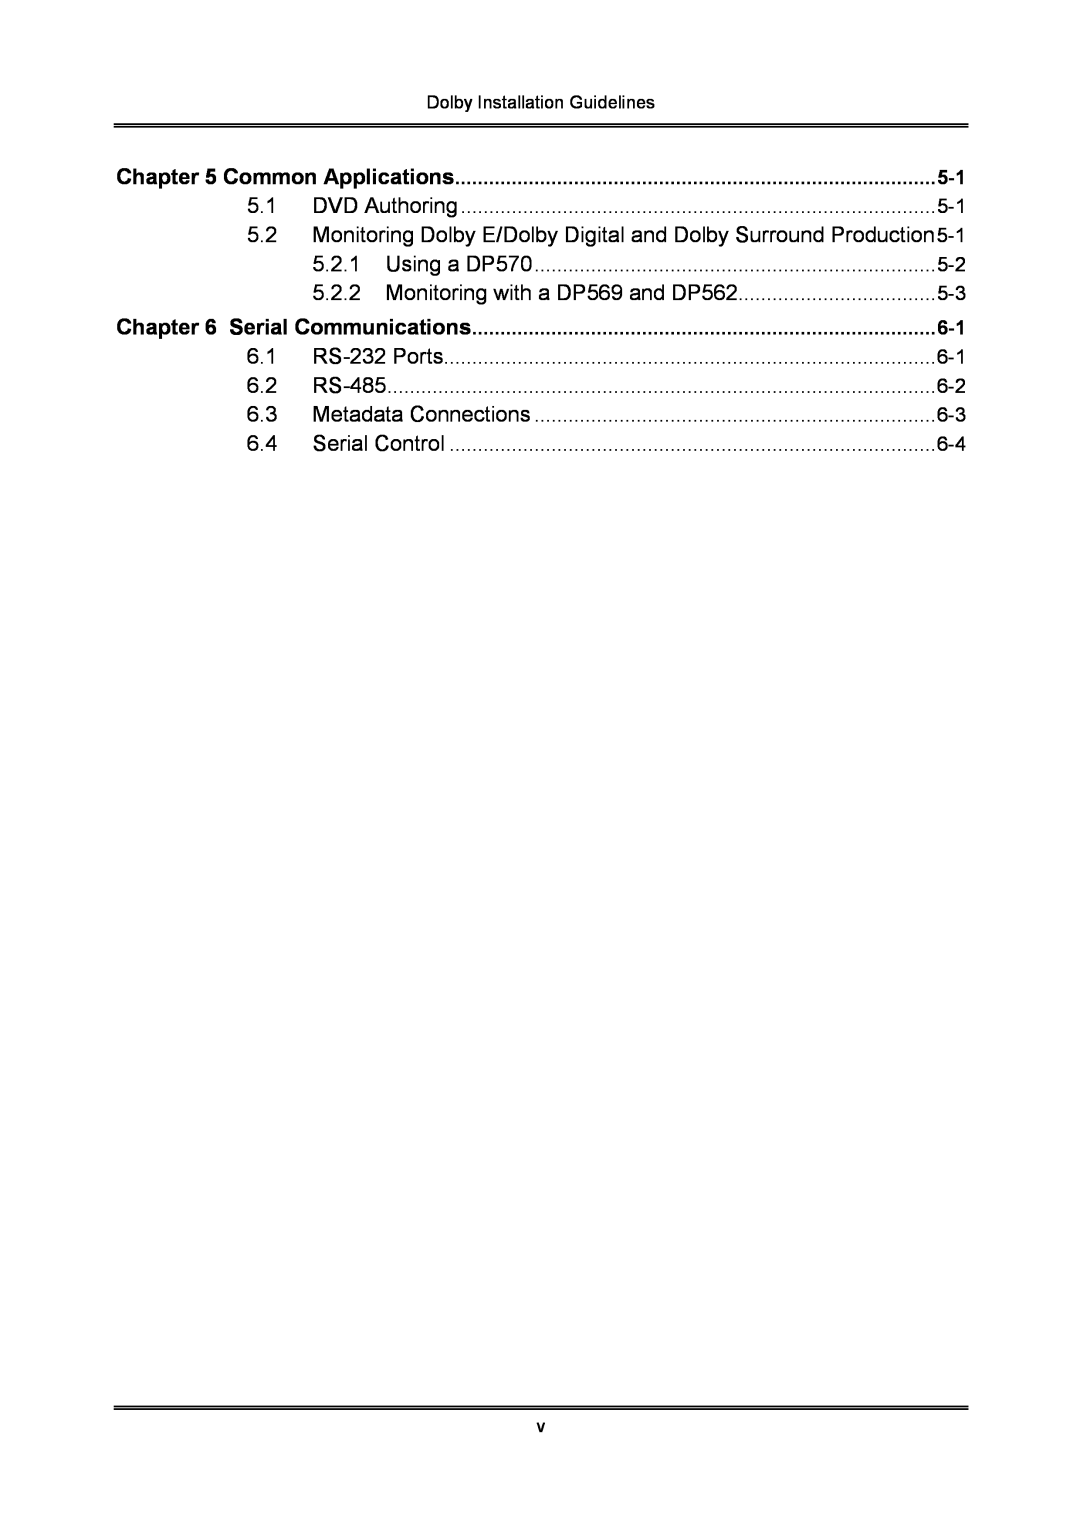 Dolby Laboratories S01/13621 manual Monitoring with a DP569 and DP562, Common Applications, Serial Communications 